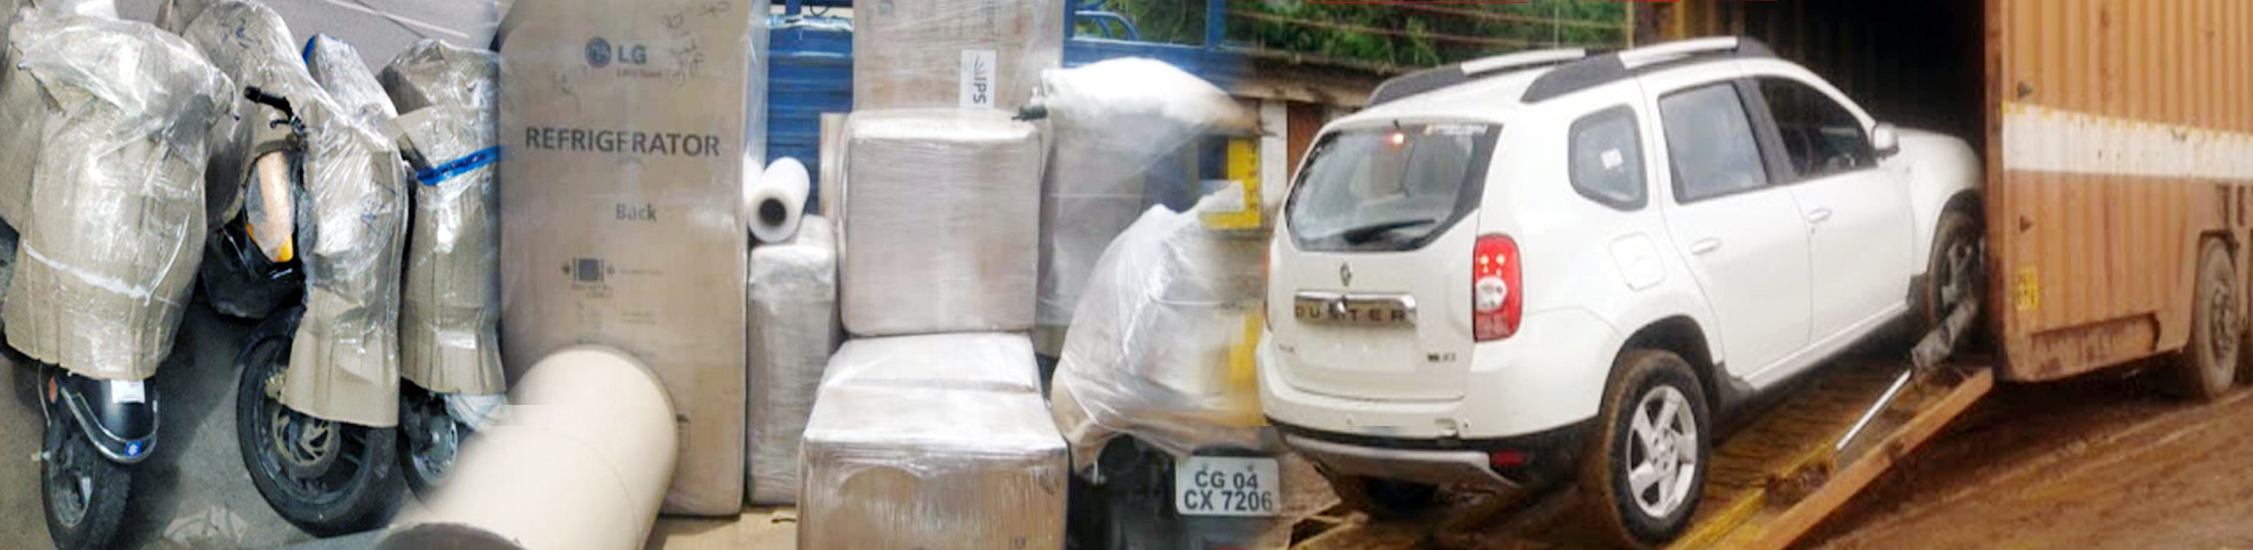 Packers and Movers Thane